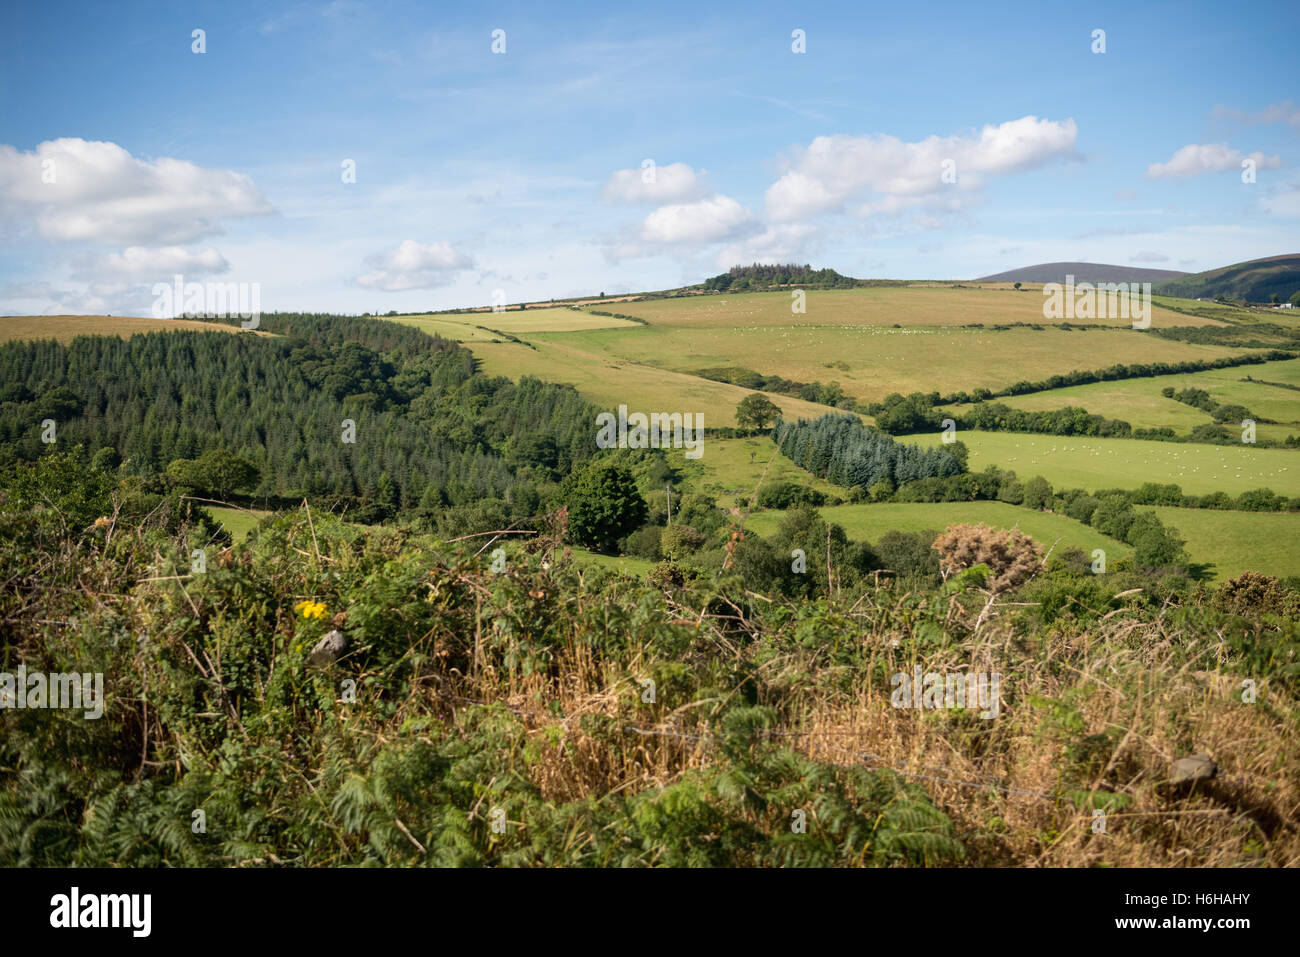 The rolling countryside with farmer's fields in the Republic of Ireland. The countryside is lush and green. Stock Photo